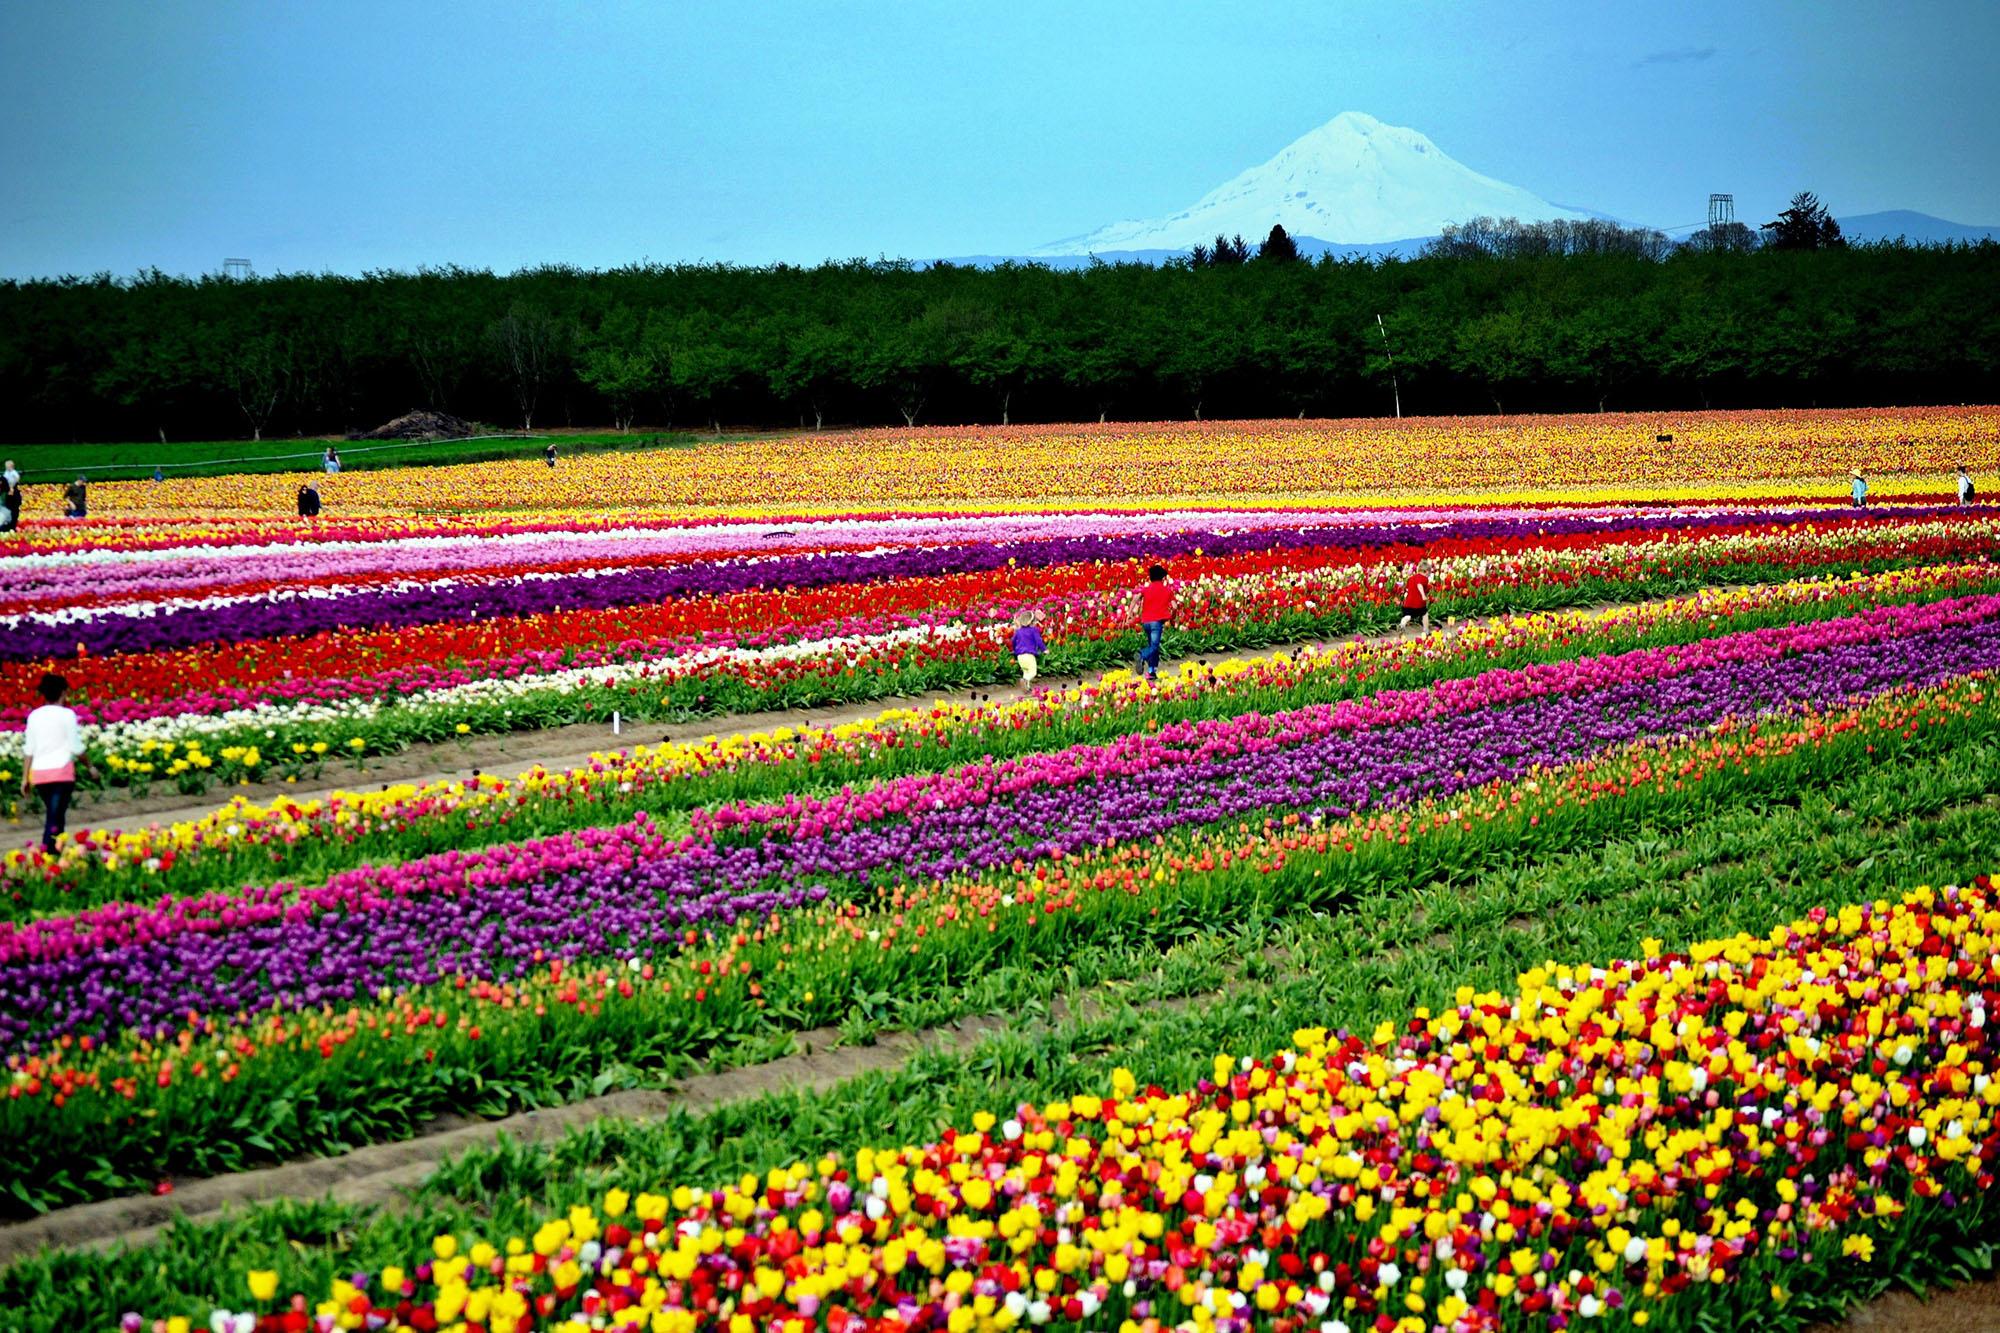 Skagit Valley Tulip Festival expects April flowers after two years of